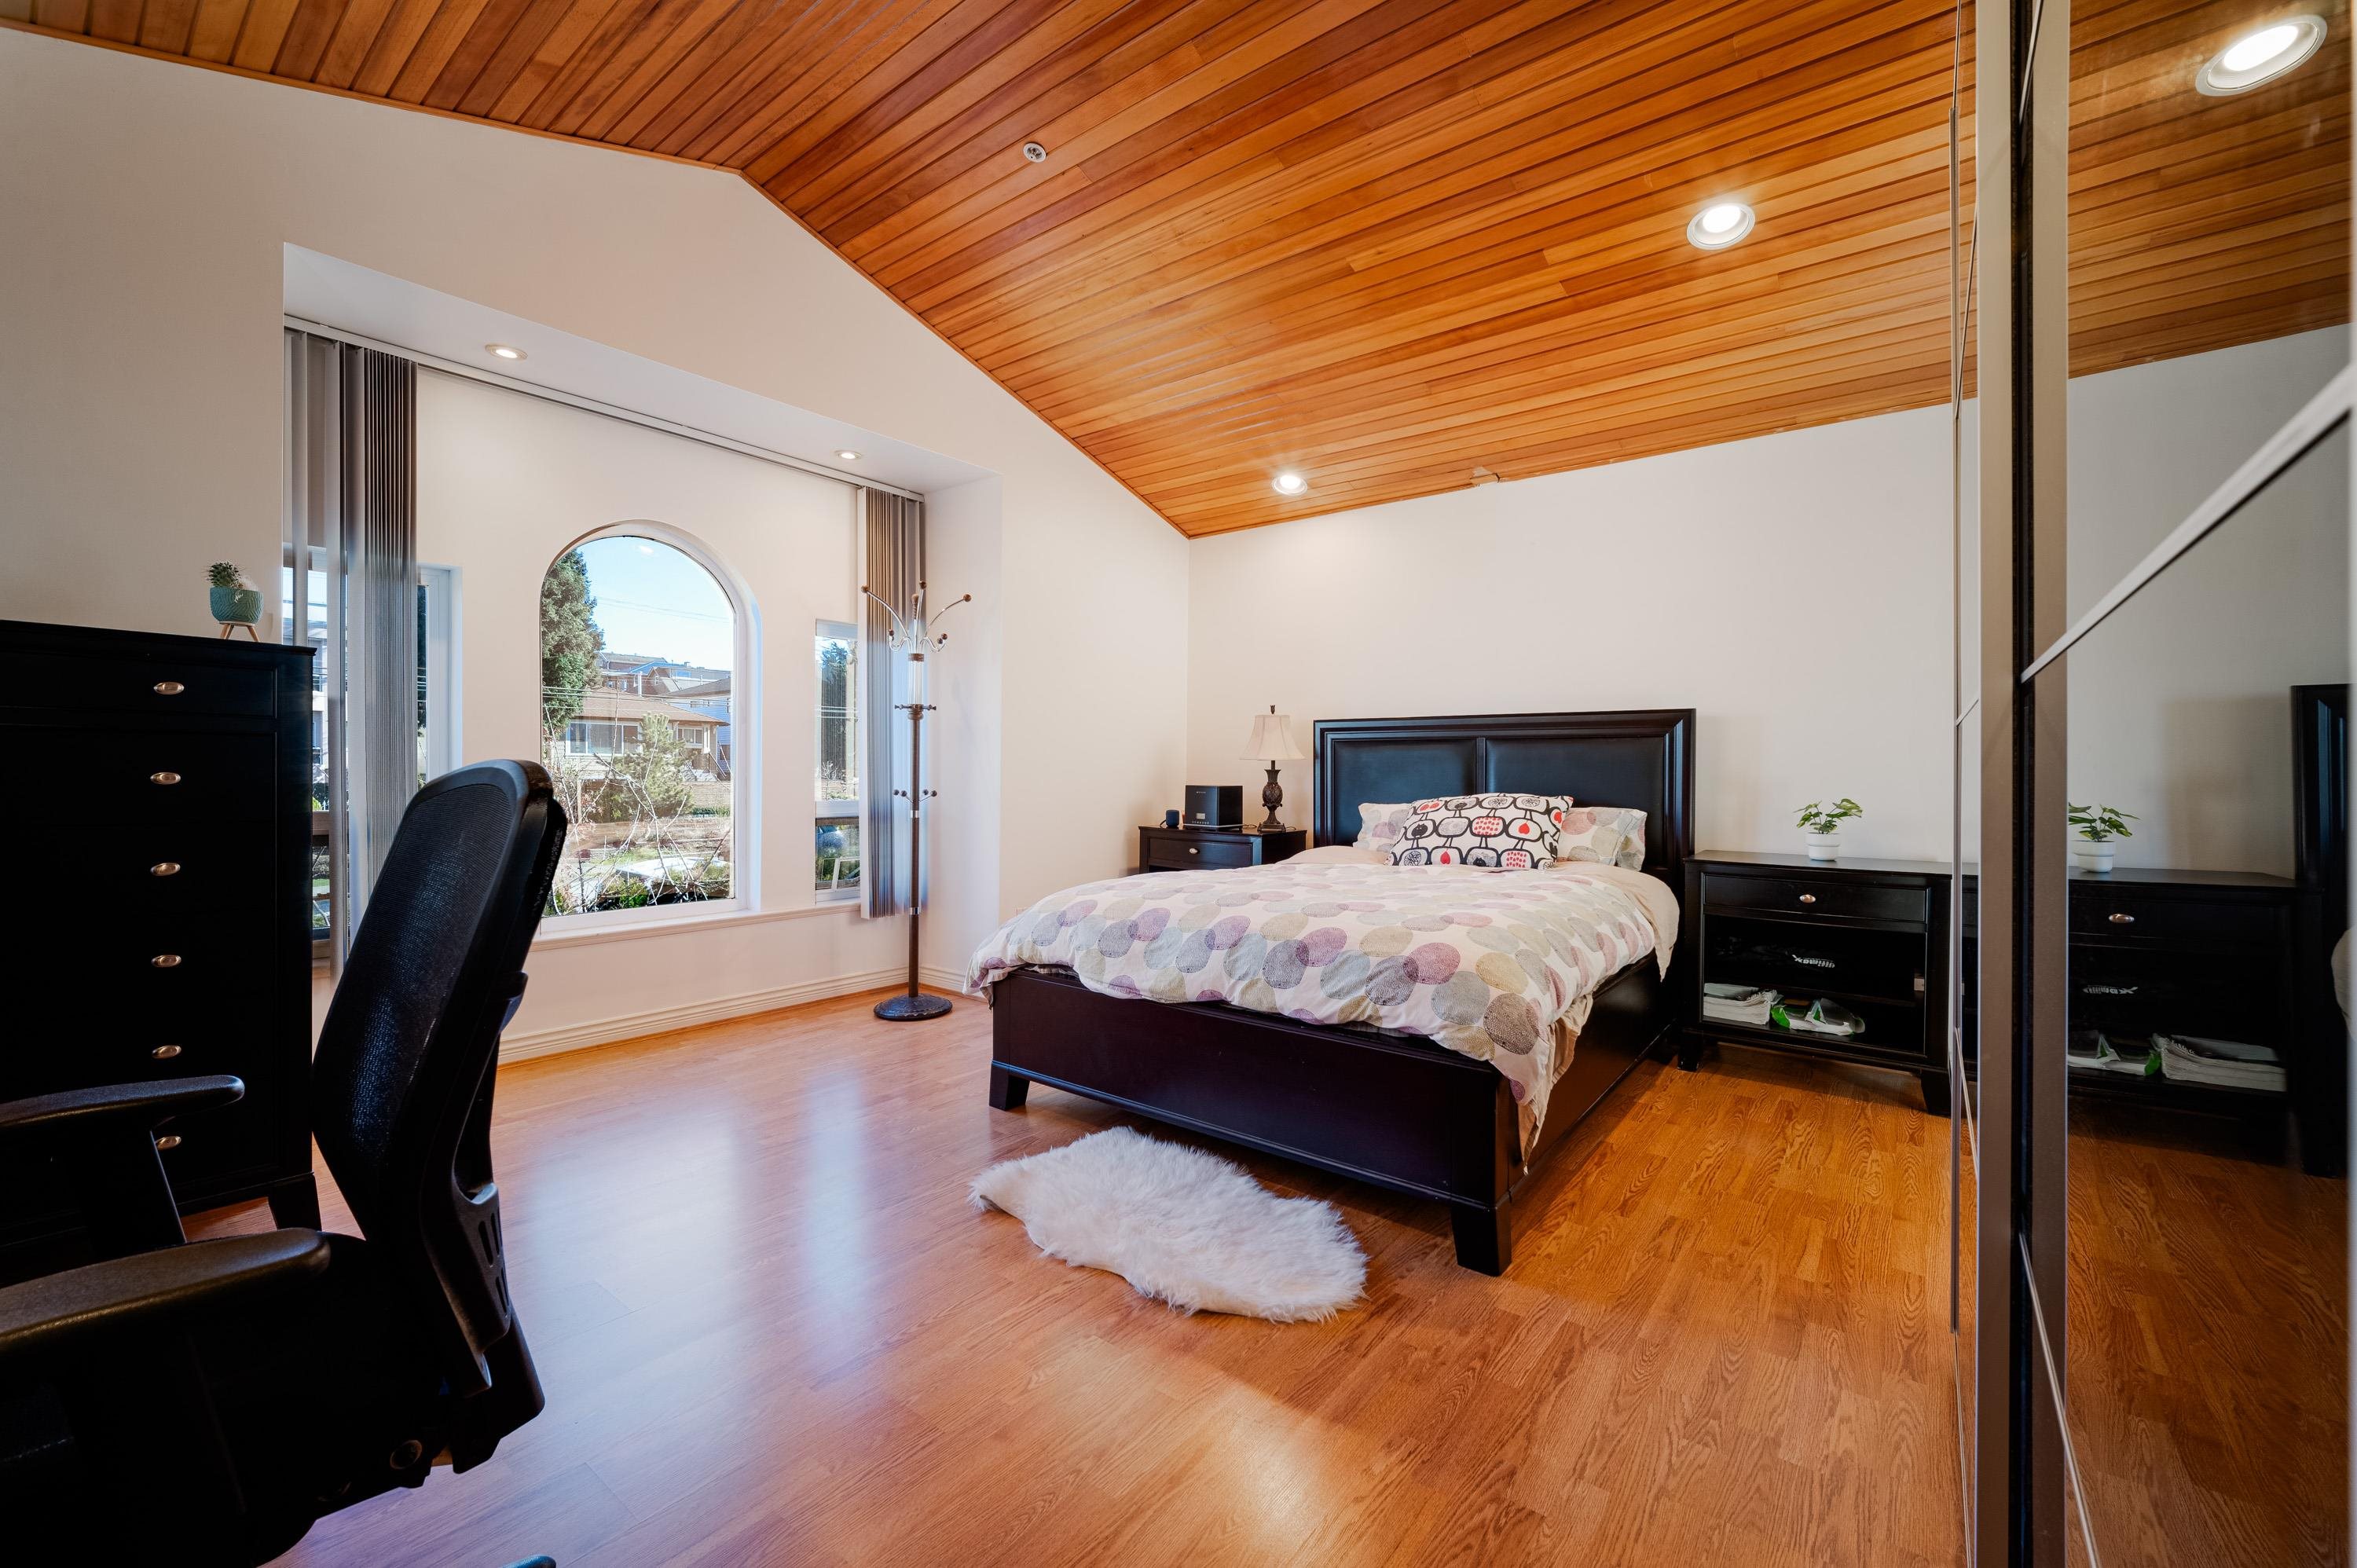 Listing image of 4105 SLOCAN STREET